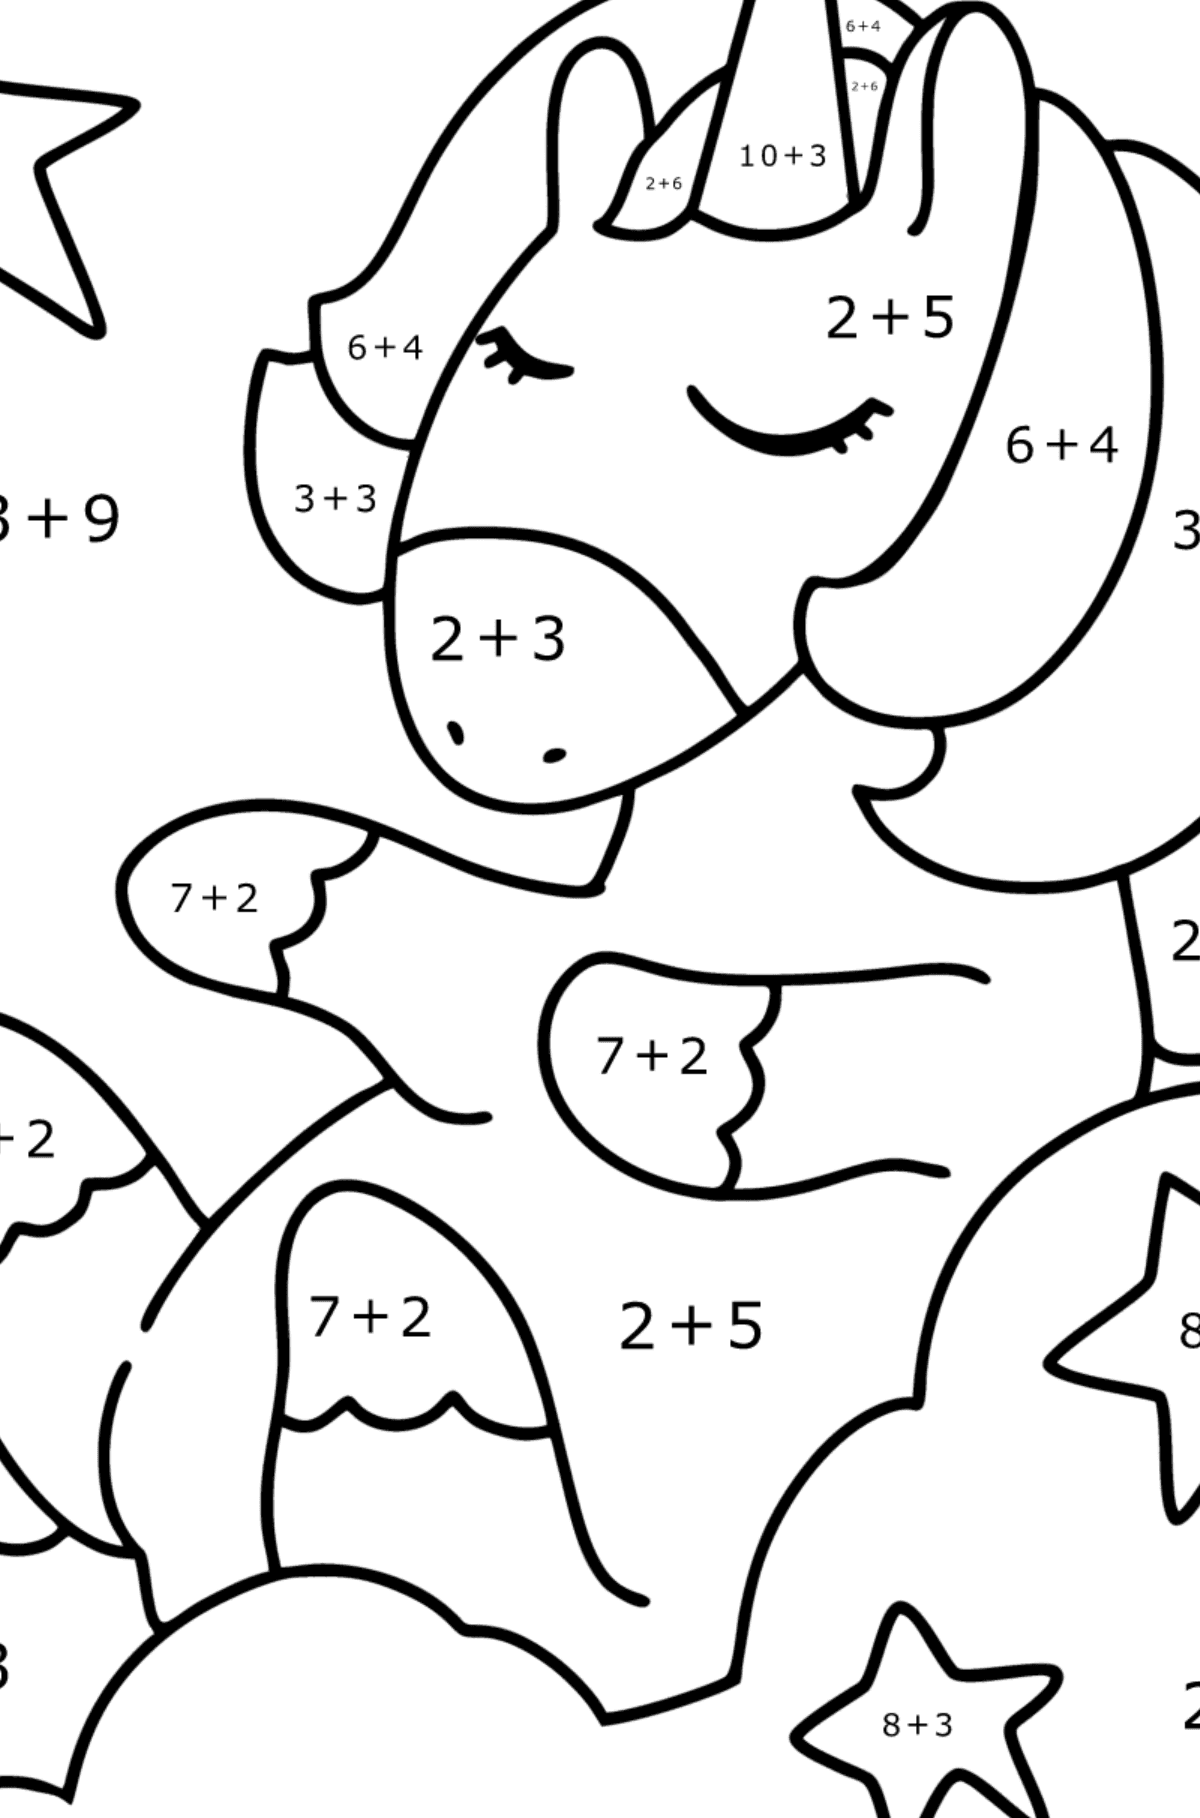 Funny unicorn coloring page - Math Coloring - Addition for Kids